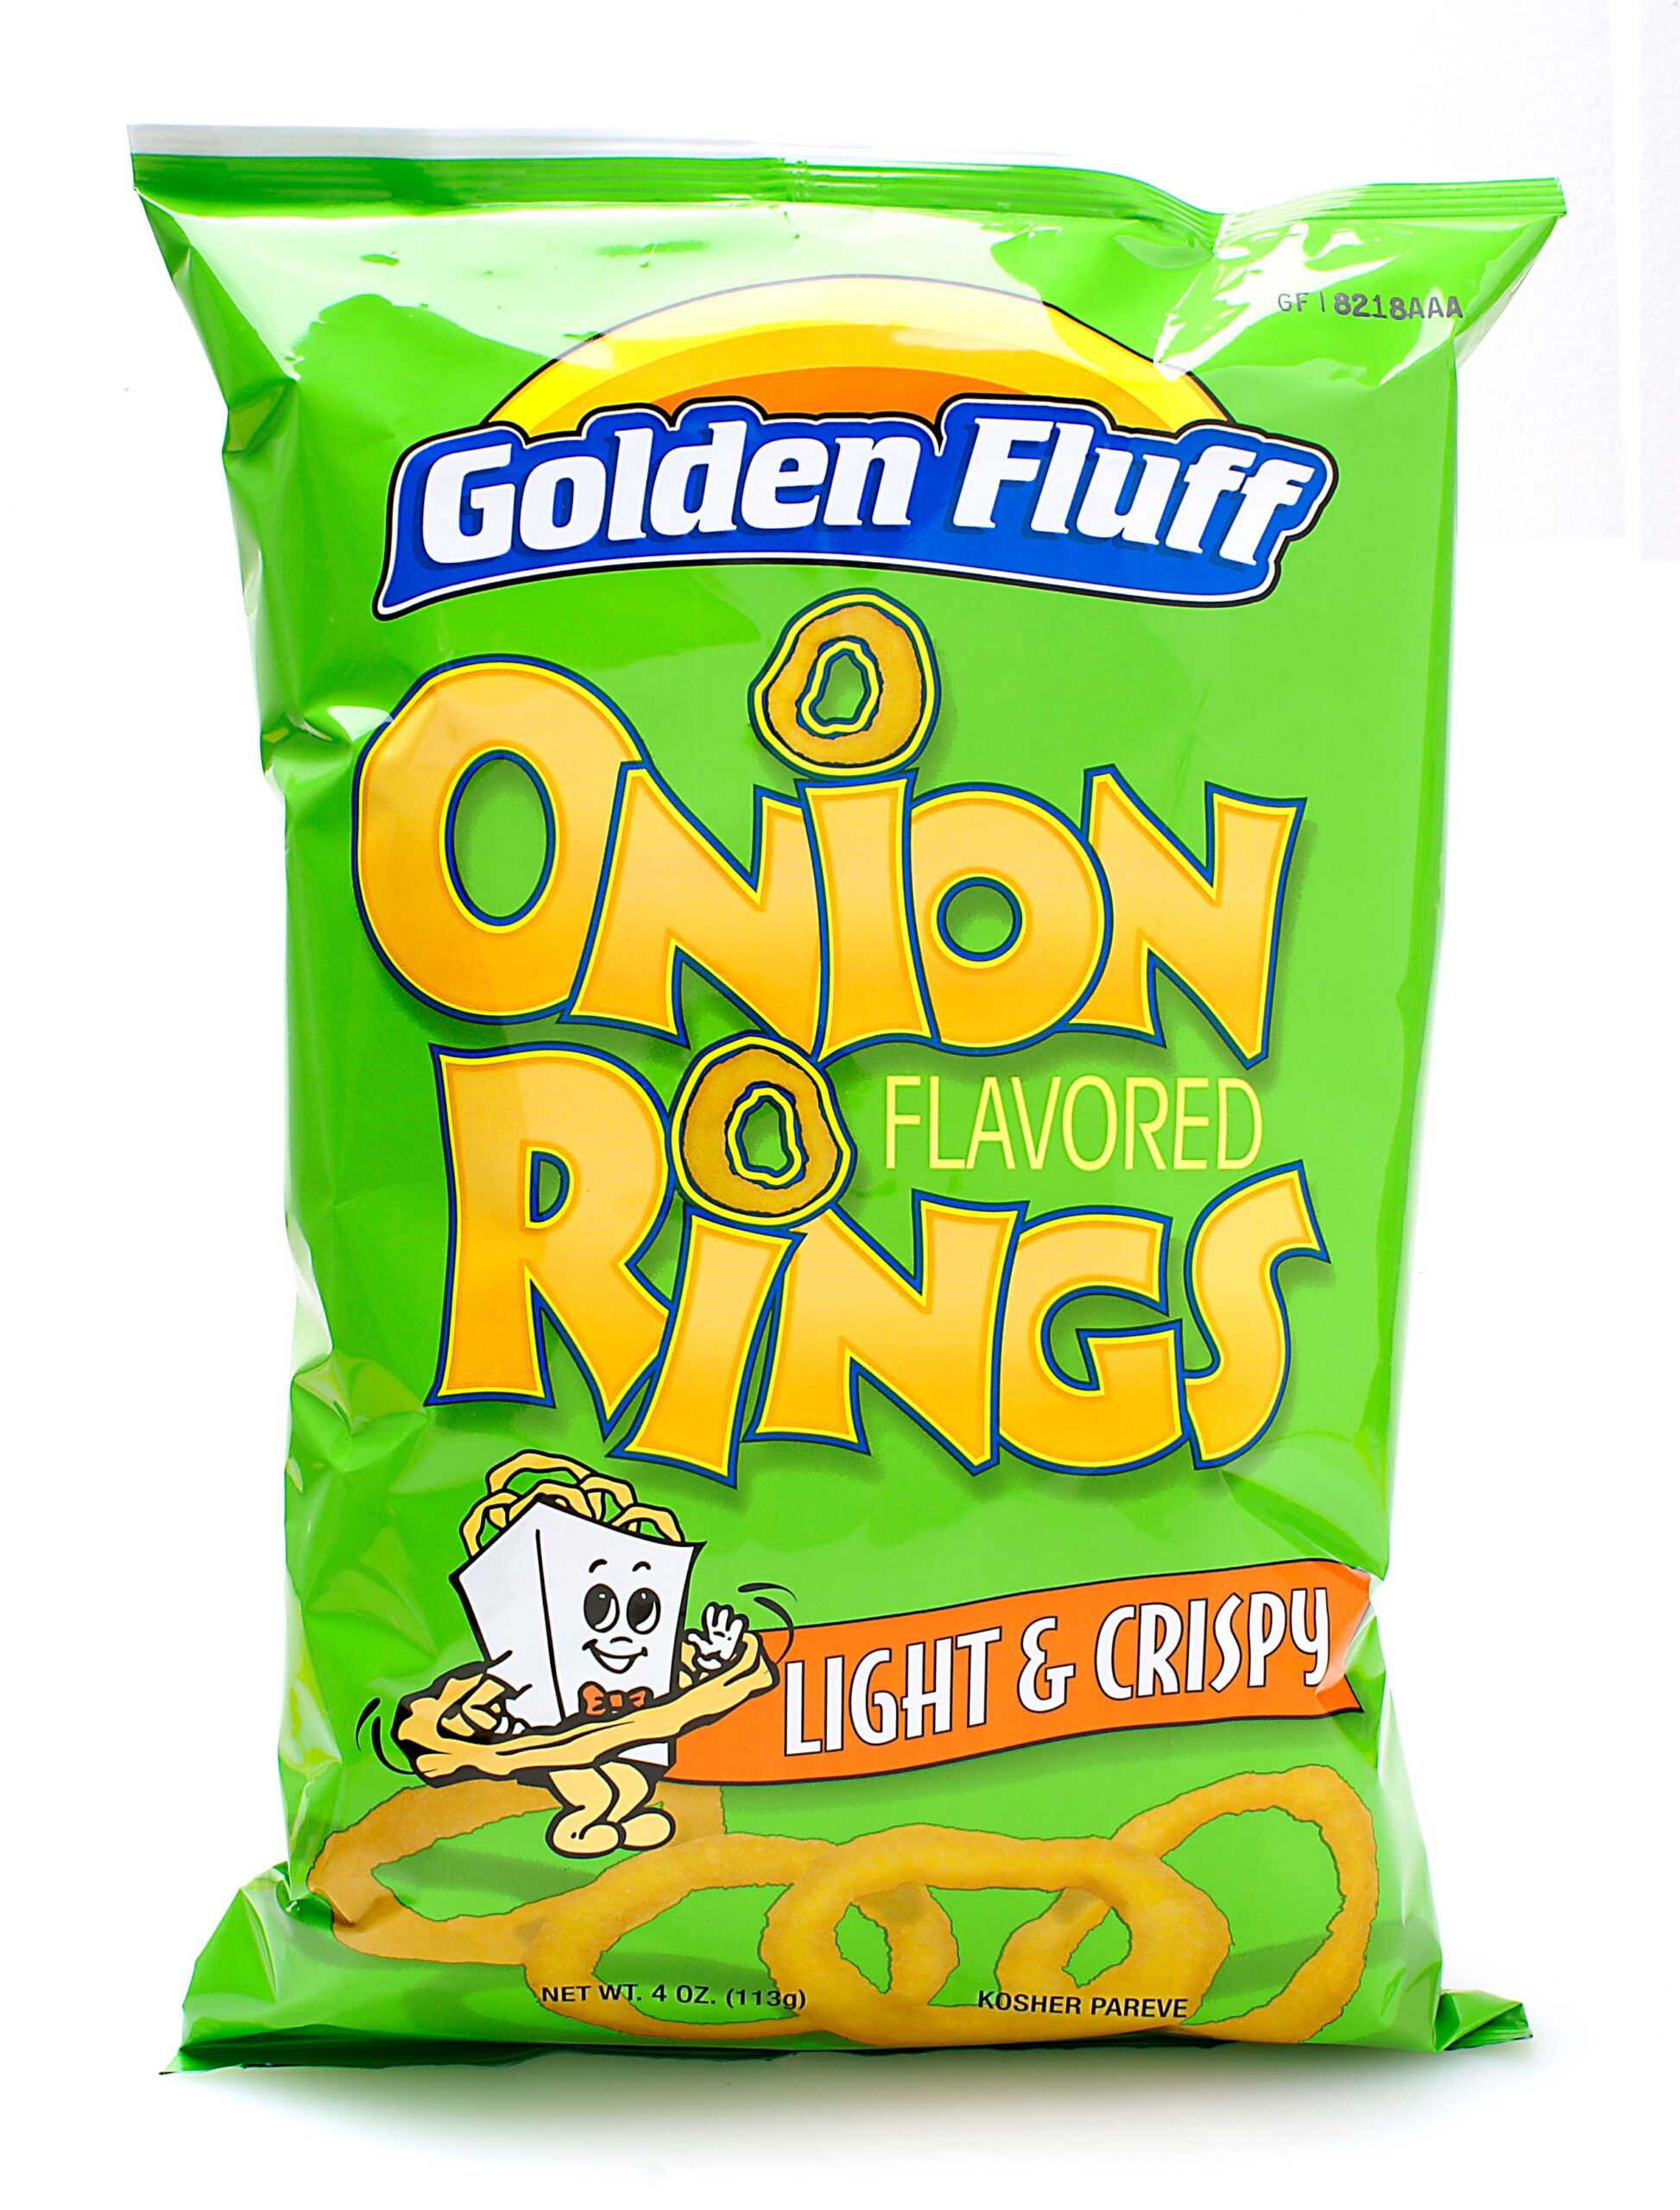 GOLDEN FLUFF ONION RINGS (LARGE)